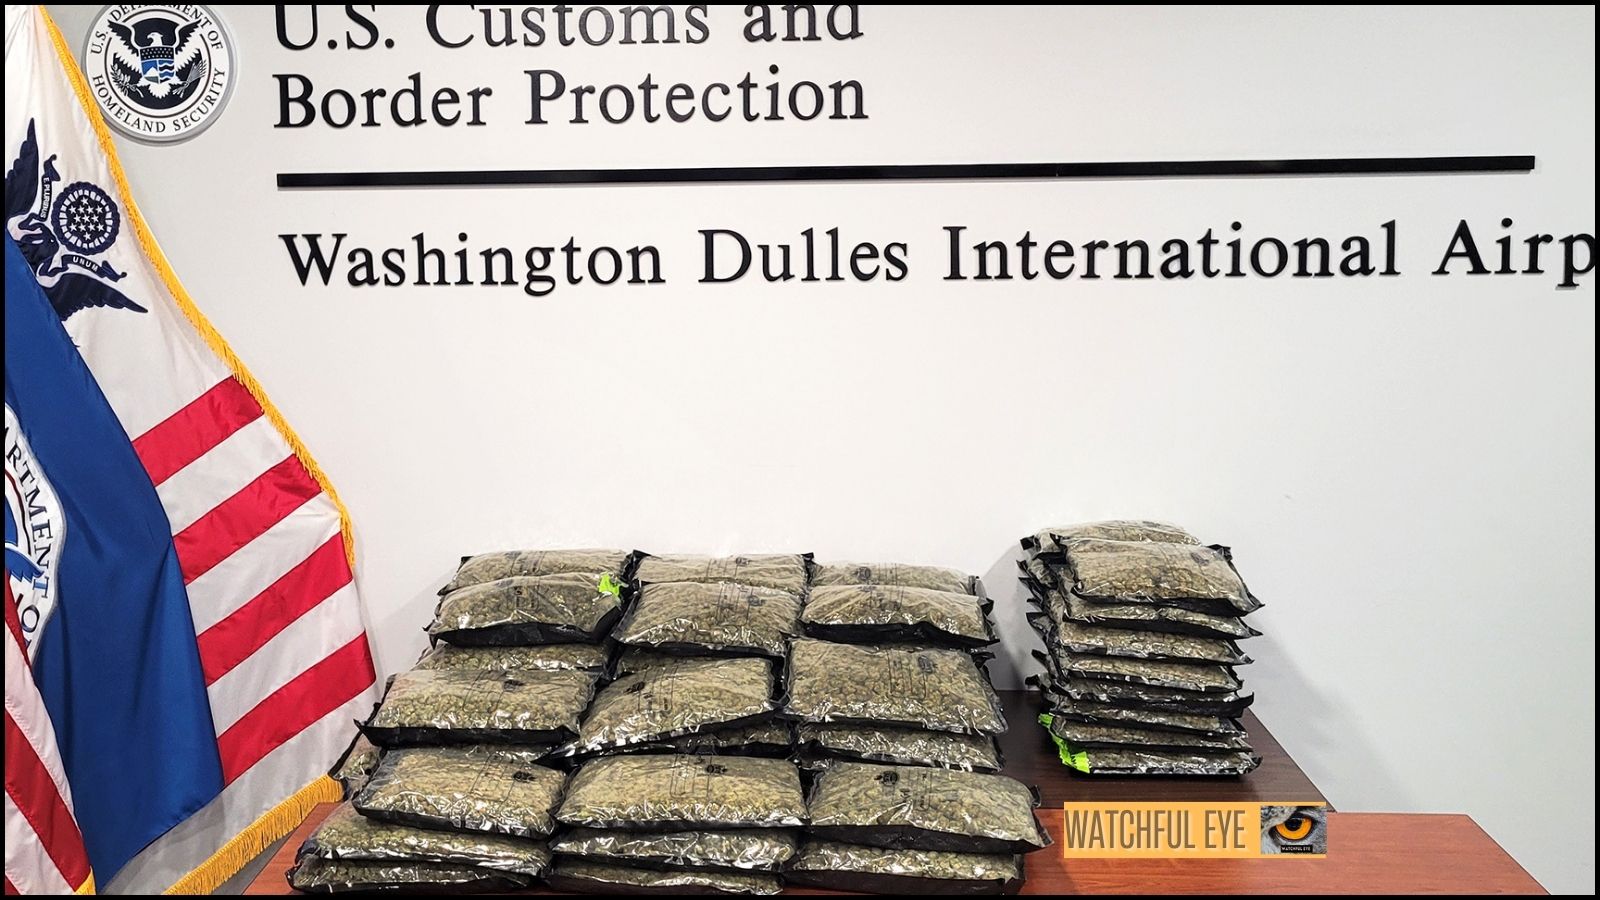 72 pounds of weed found at Dulles Airport, 2 men arrested